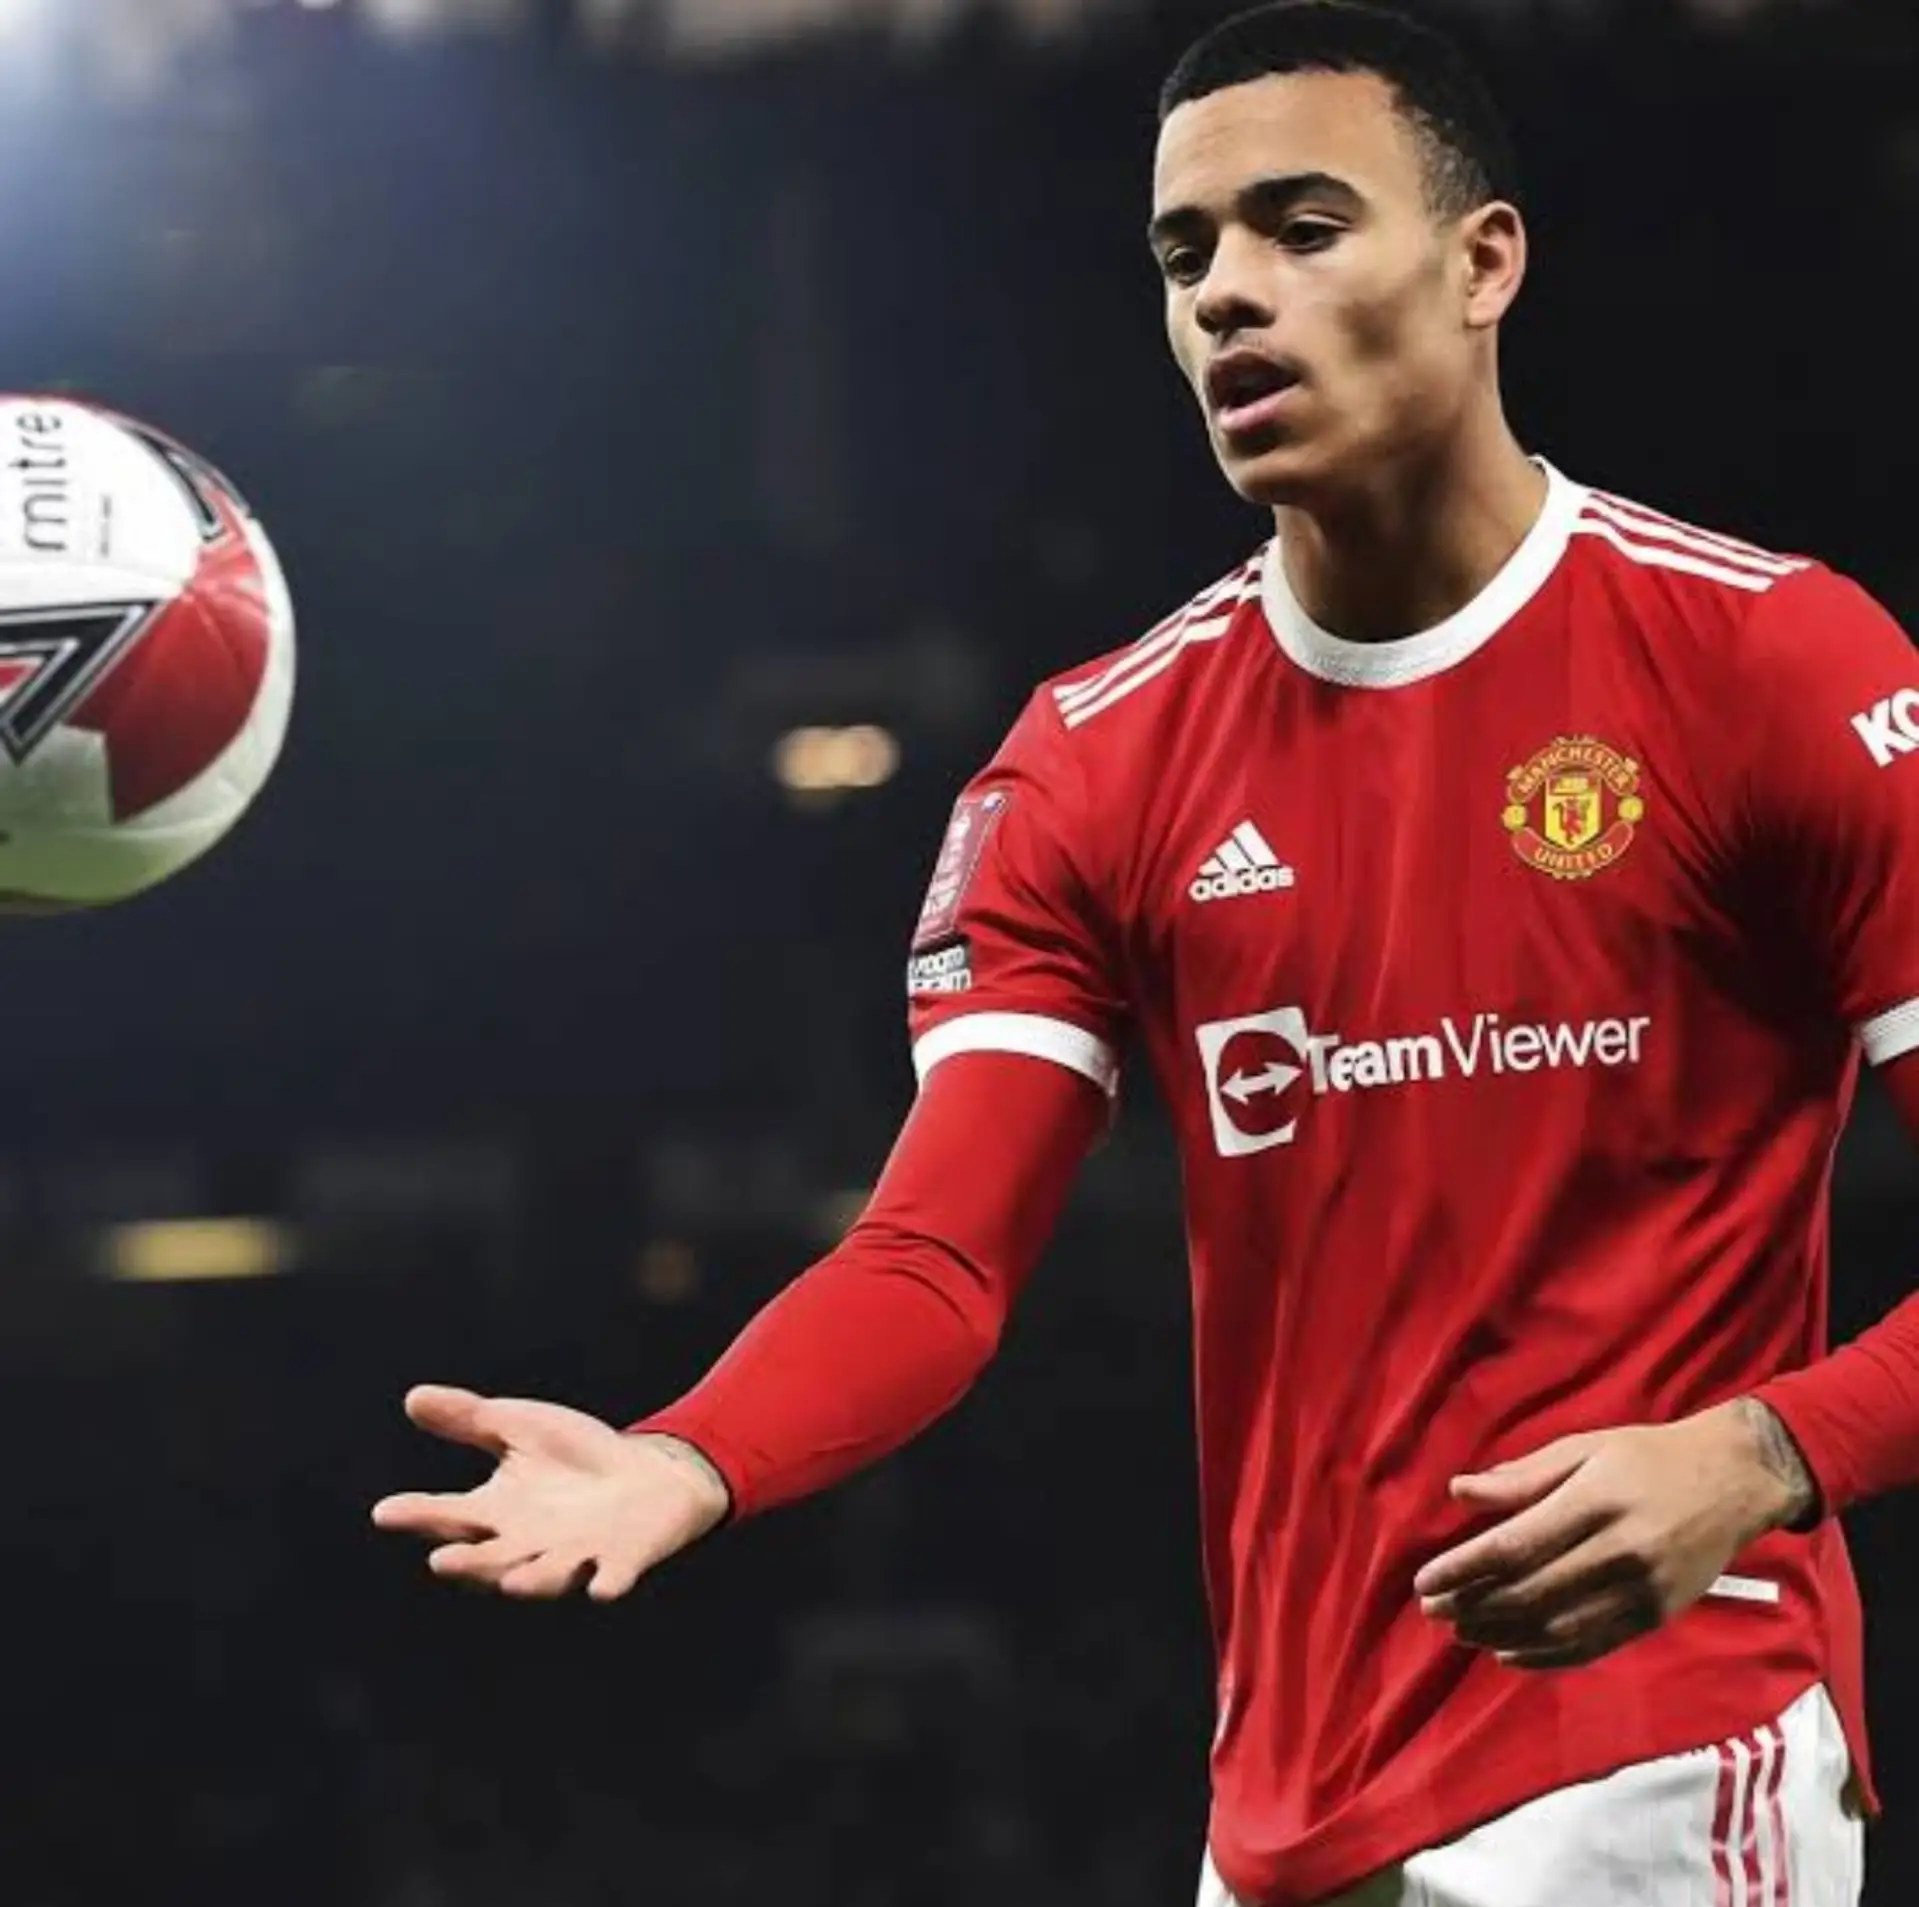 🚶🏽‍♂️🚶🏽‍♂️🚶🏽‍♂️MAINSTREAM TV INTERVIEW WITH DELE OLAWANLE ABOUT MASON GREENWOOD SITUATION WITH MANCHESTER UNITED